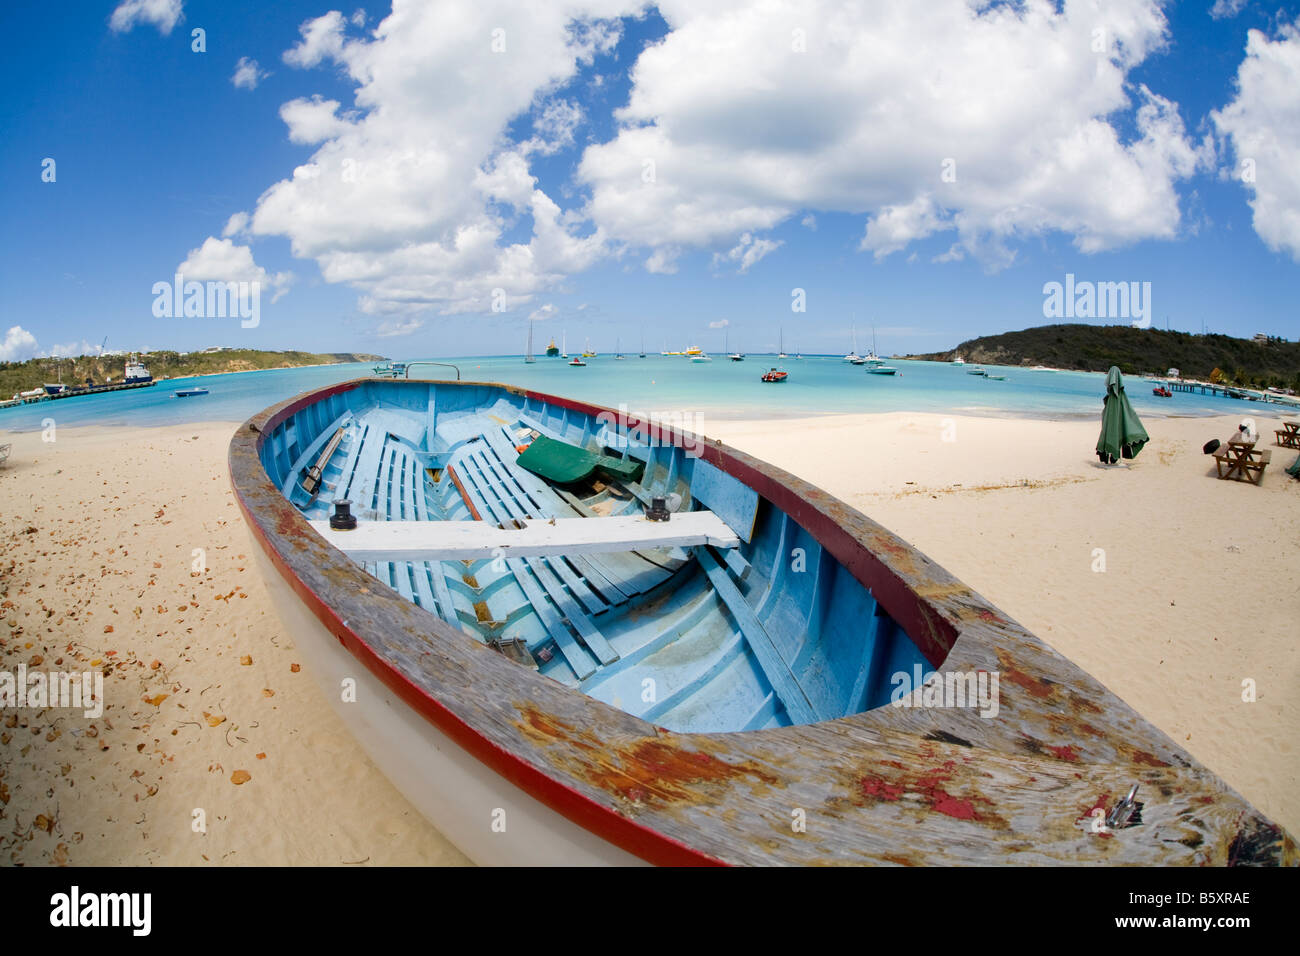 Road Bay harbor in the Sandy Ground area on the caribbean island of Anguilla in the British West Indies Stock Photo